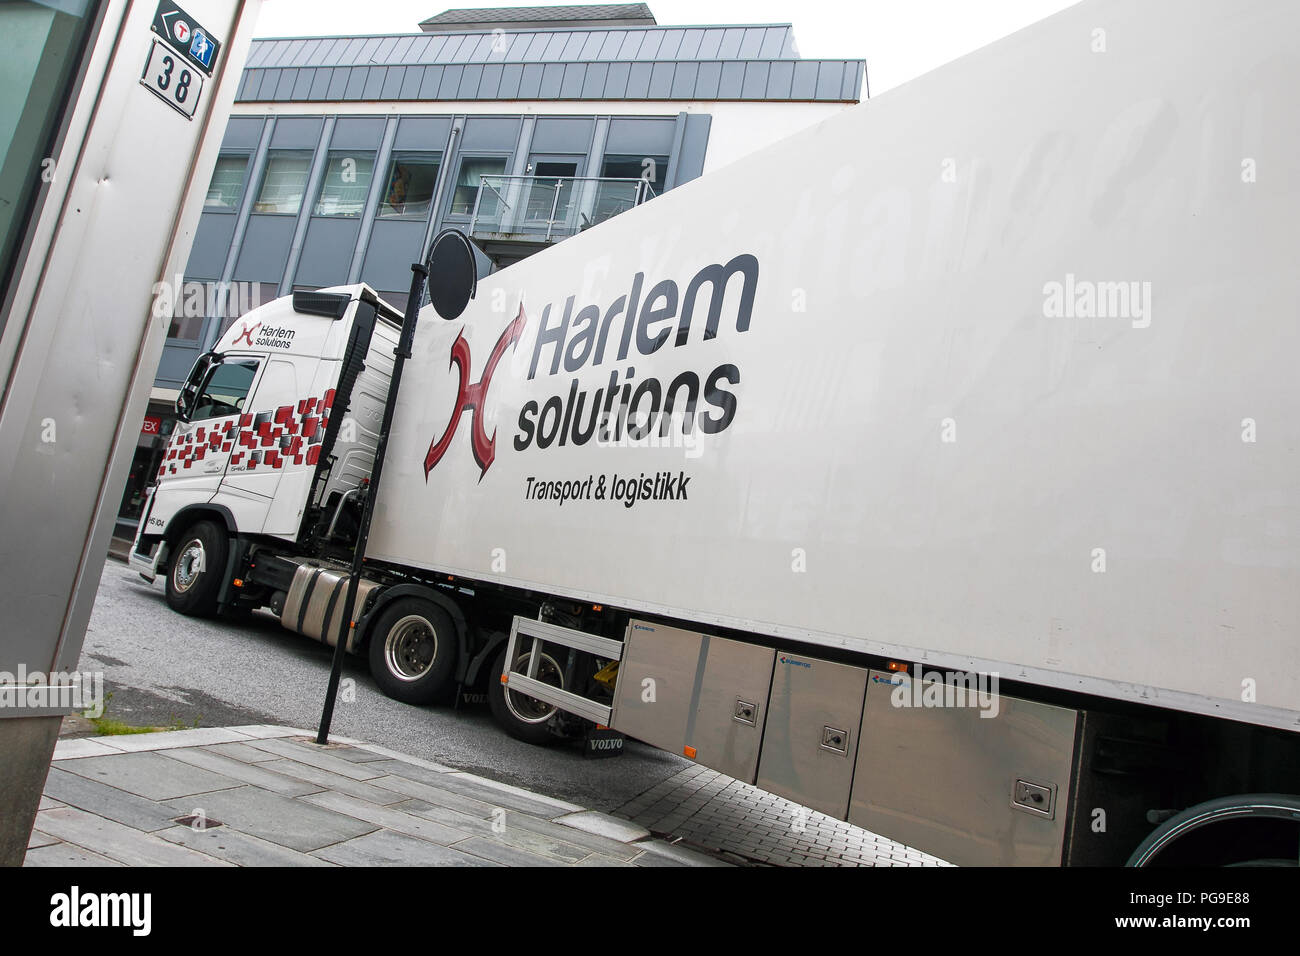 Floro, Norway, July 24, 2018: Harlem Solutions large truck is making a tight left turn in the streets of Floro. Stock Photo